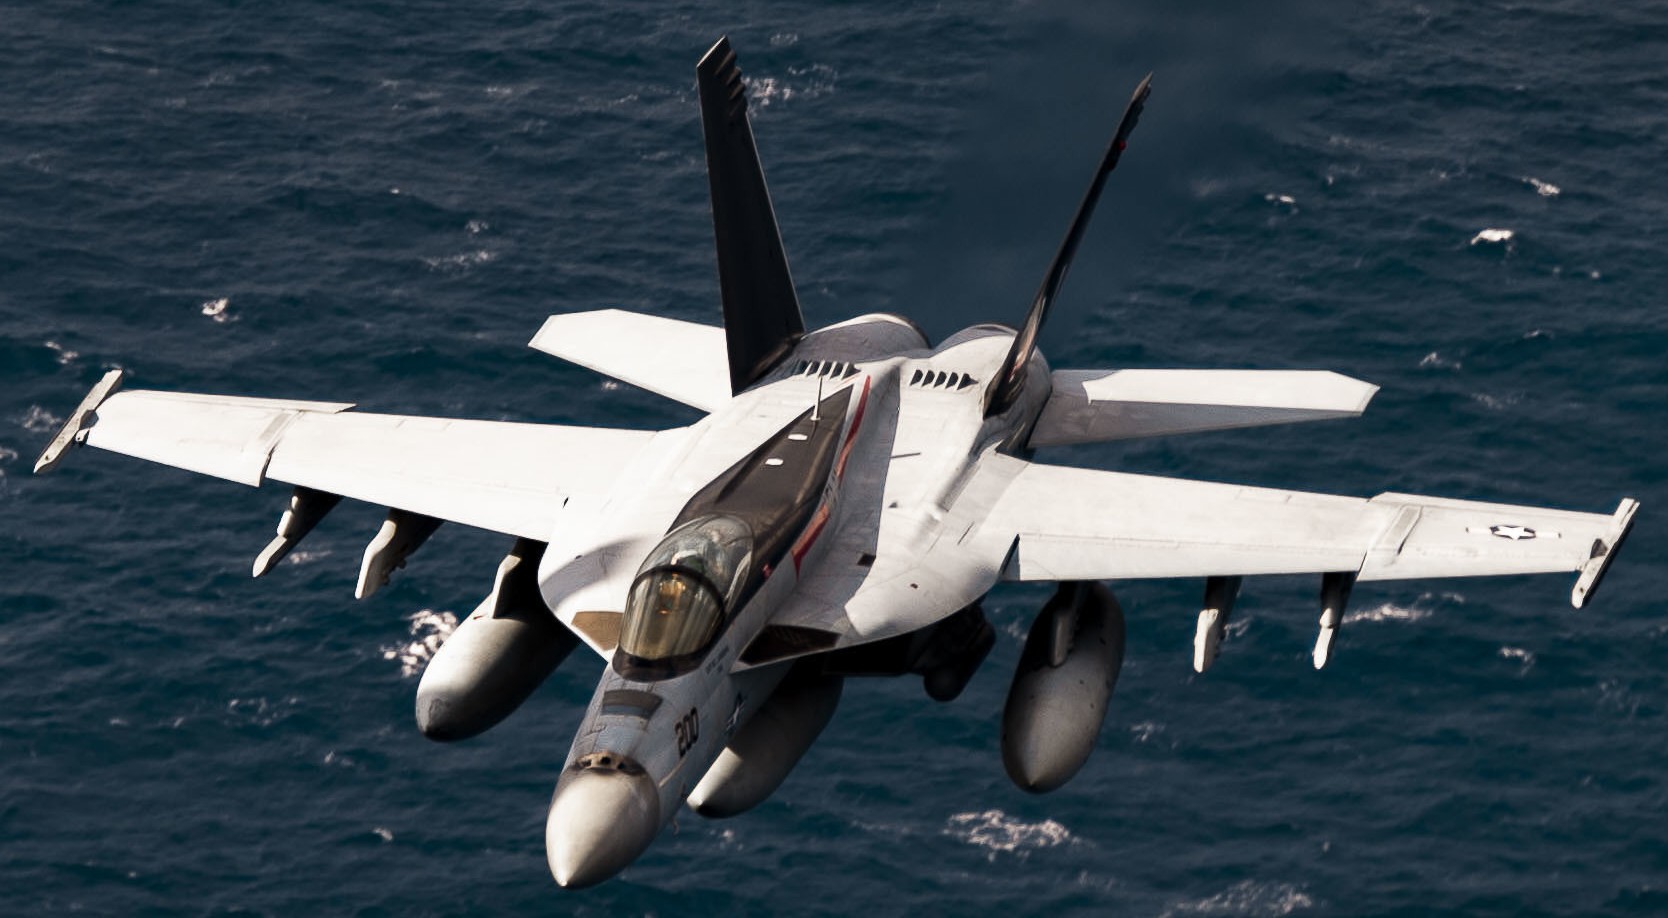 vfa-14 tophatters strike fighter squadron f/a-18e super hornet cvn-72 uss abraham lincoln cvw-9 us navy 53